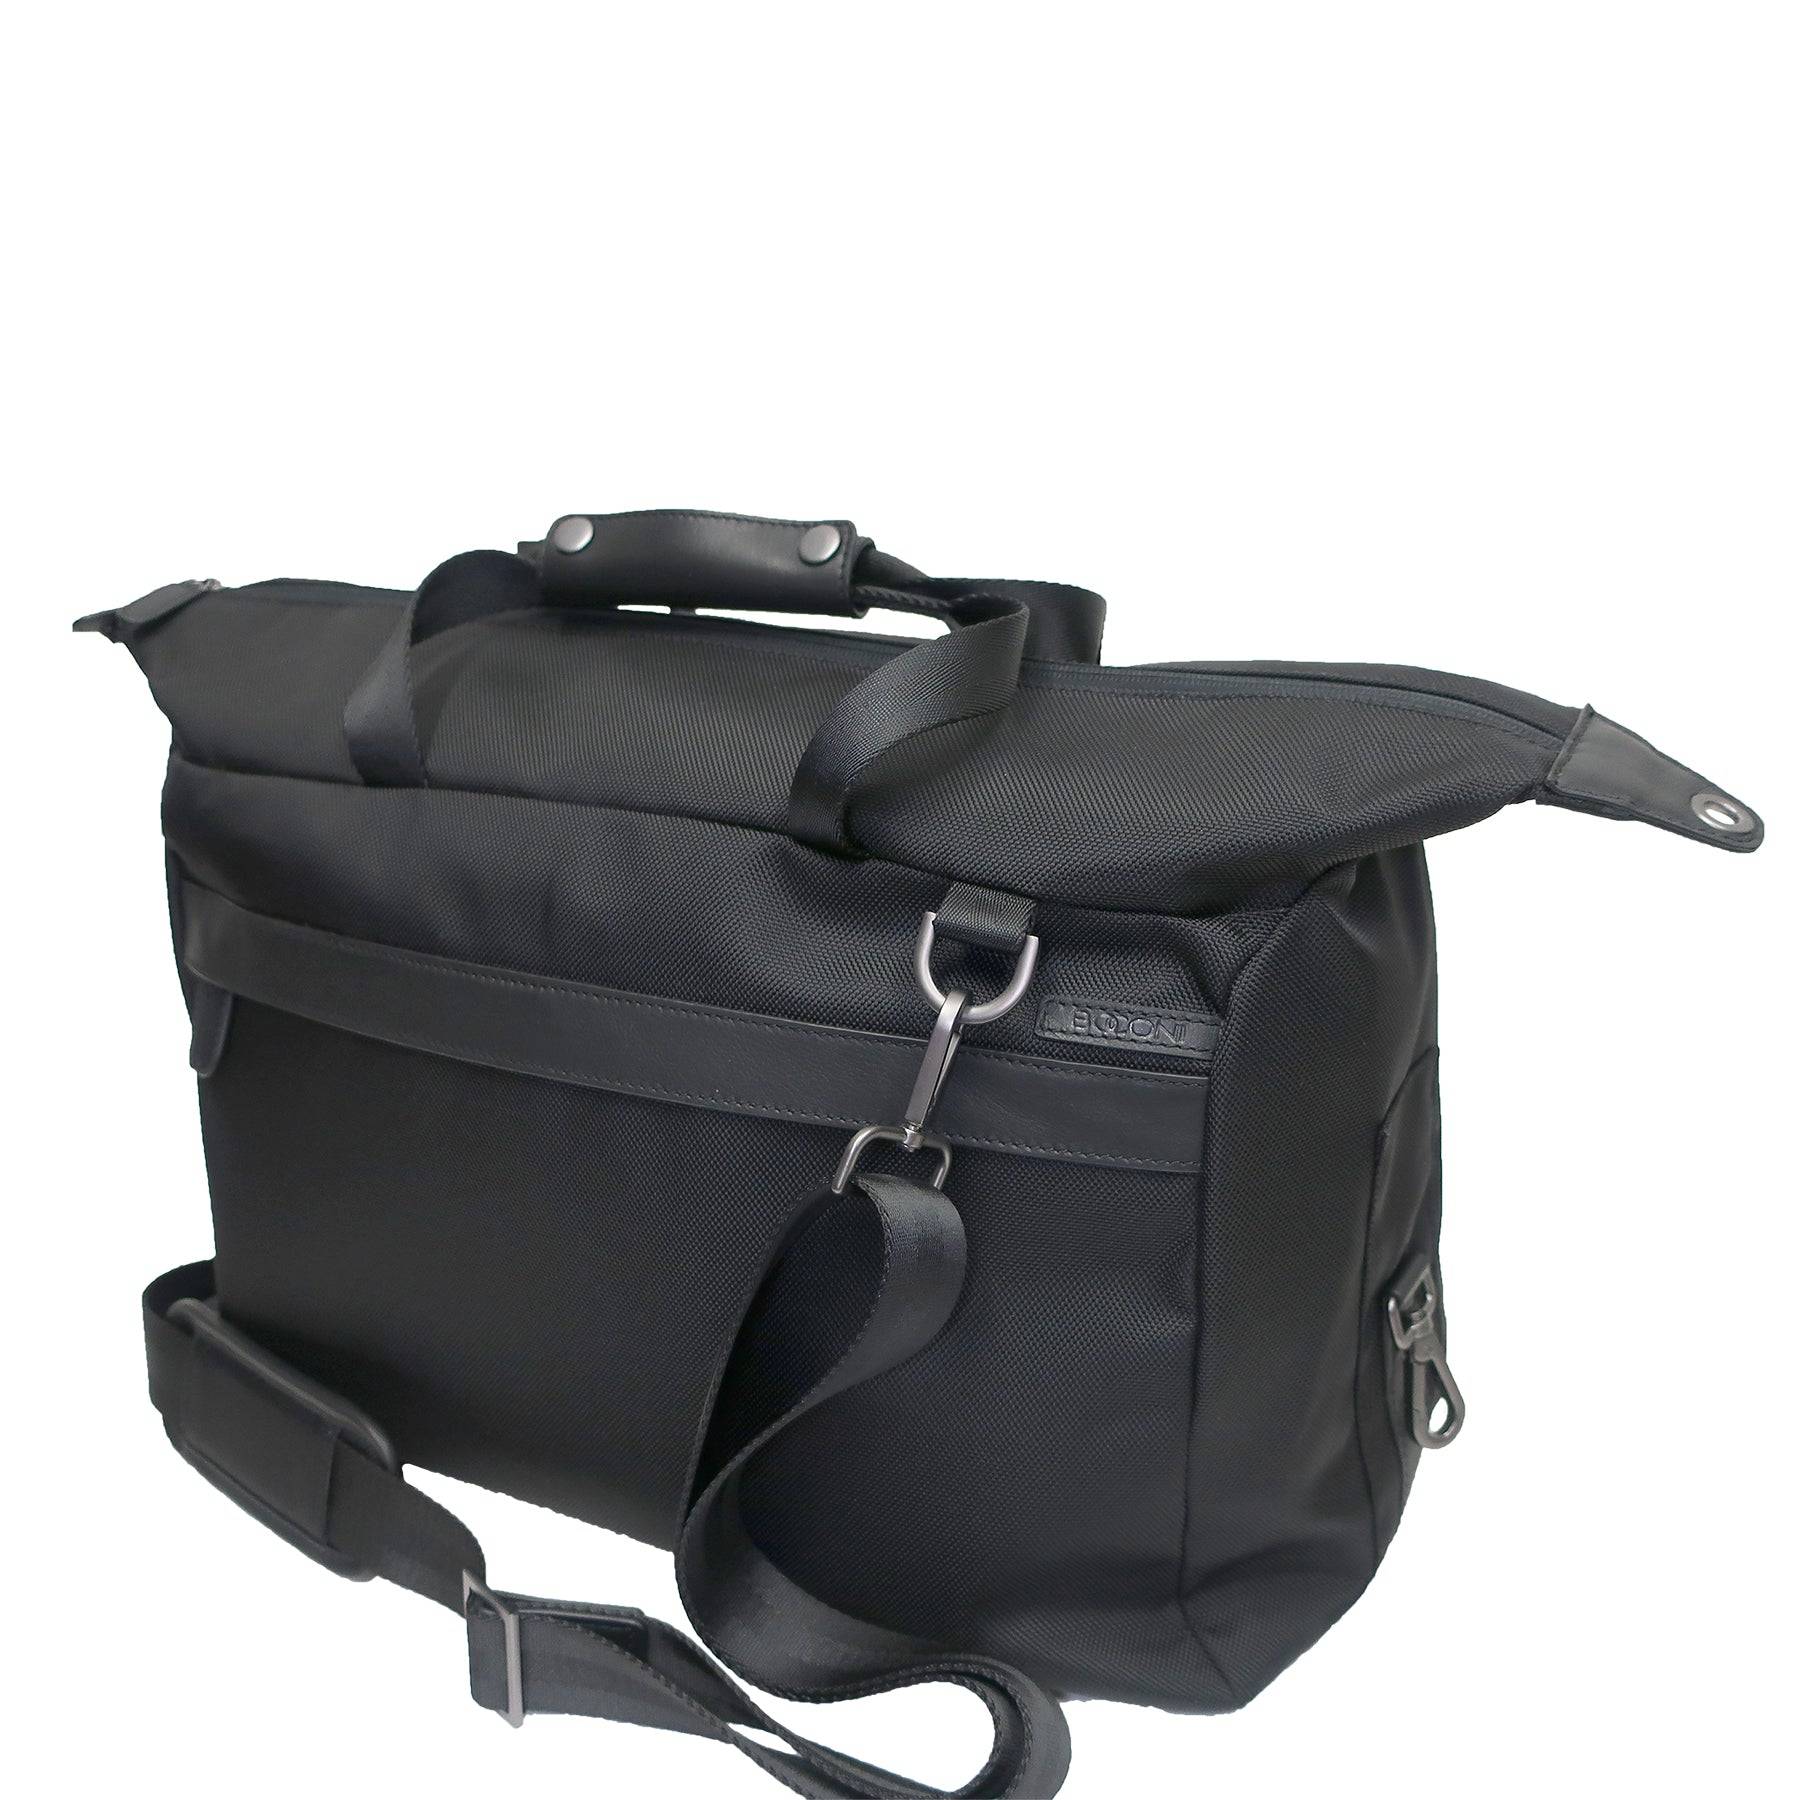 front view with shoulder strap of ballistic nylon and leather trim duffel bag